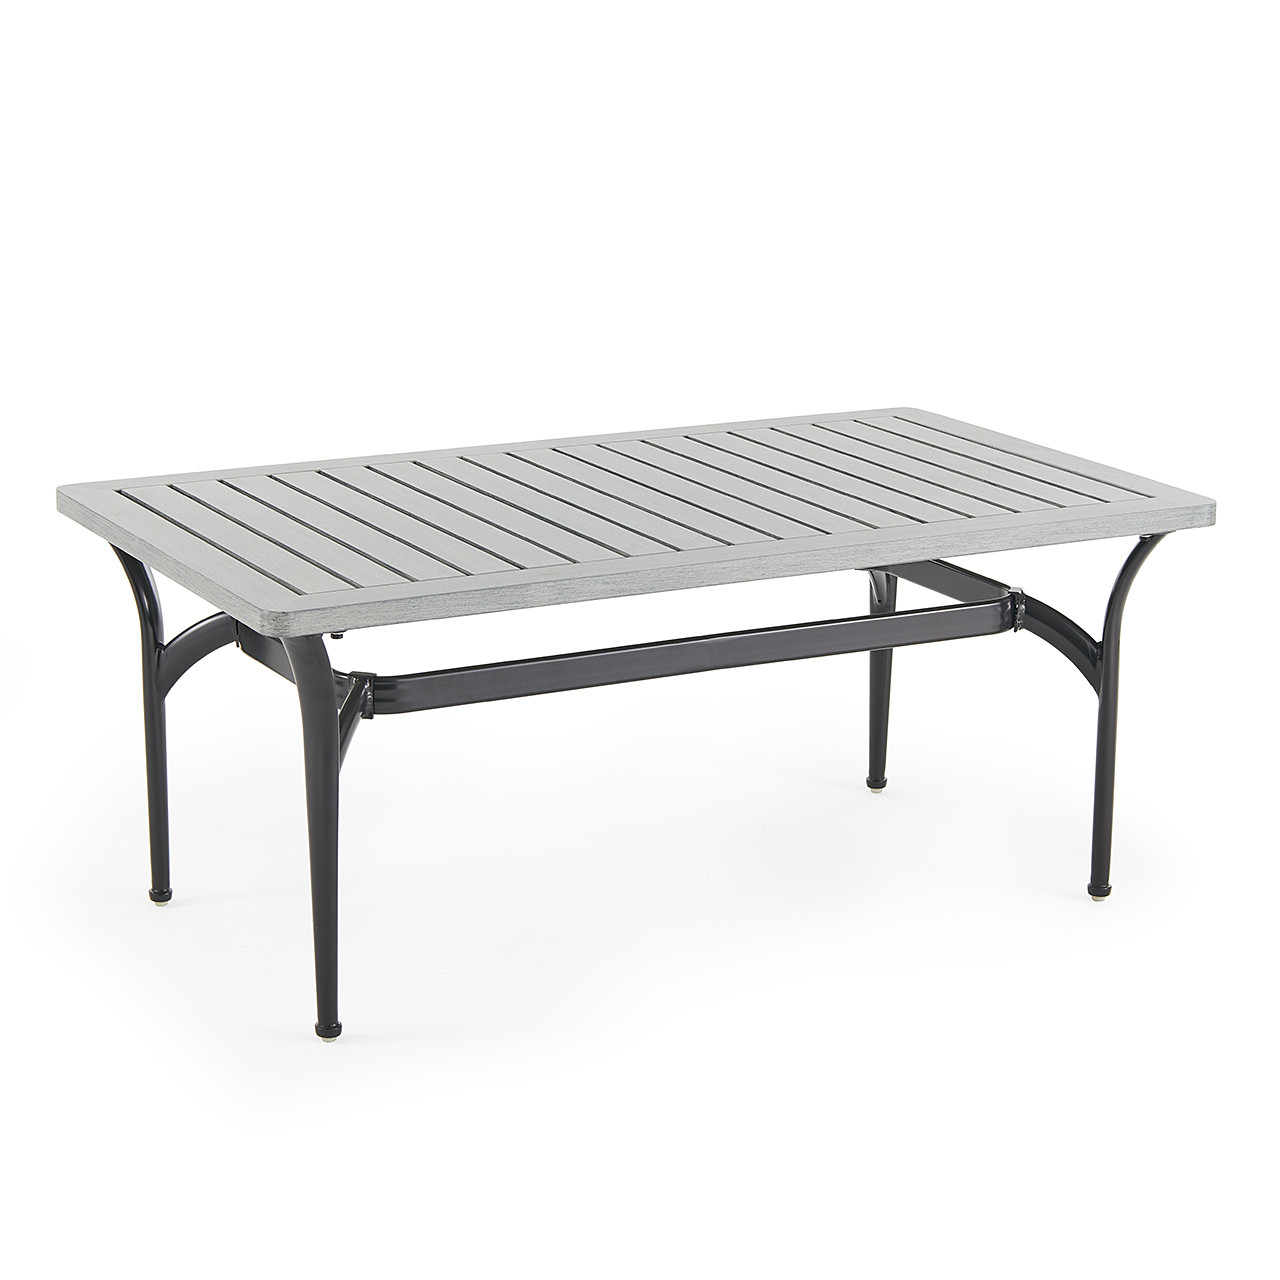 Metro Meteor Aluminum with Cushions 3 Pc. Sofa Group + Club Chairs + 52 x 30 in. Slat Top Coffee Table